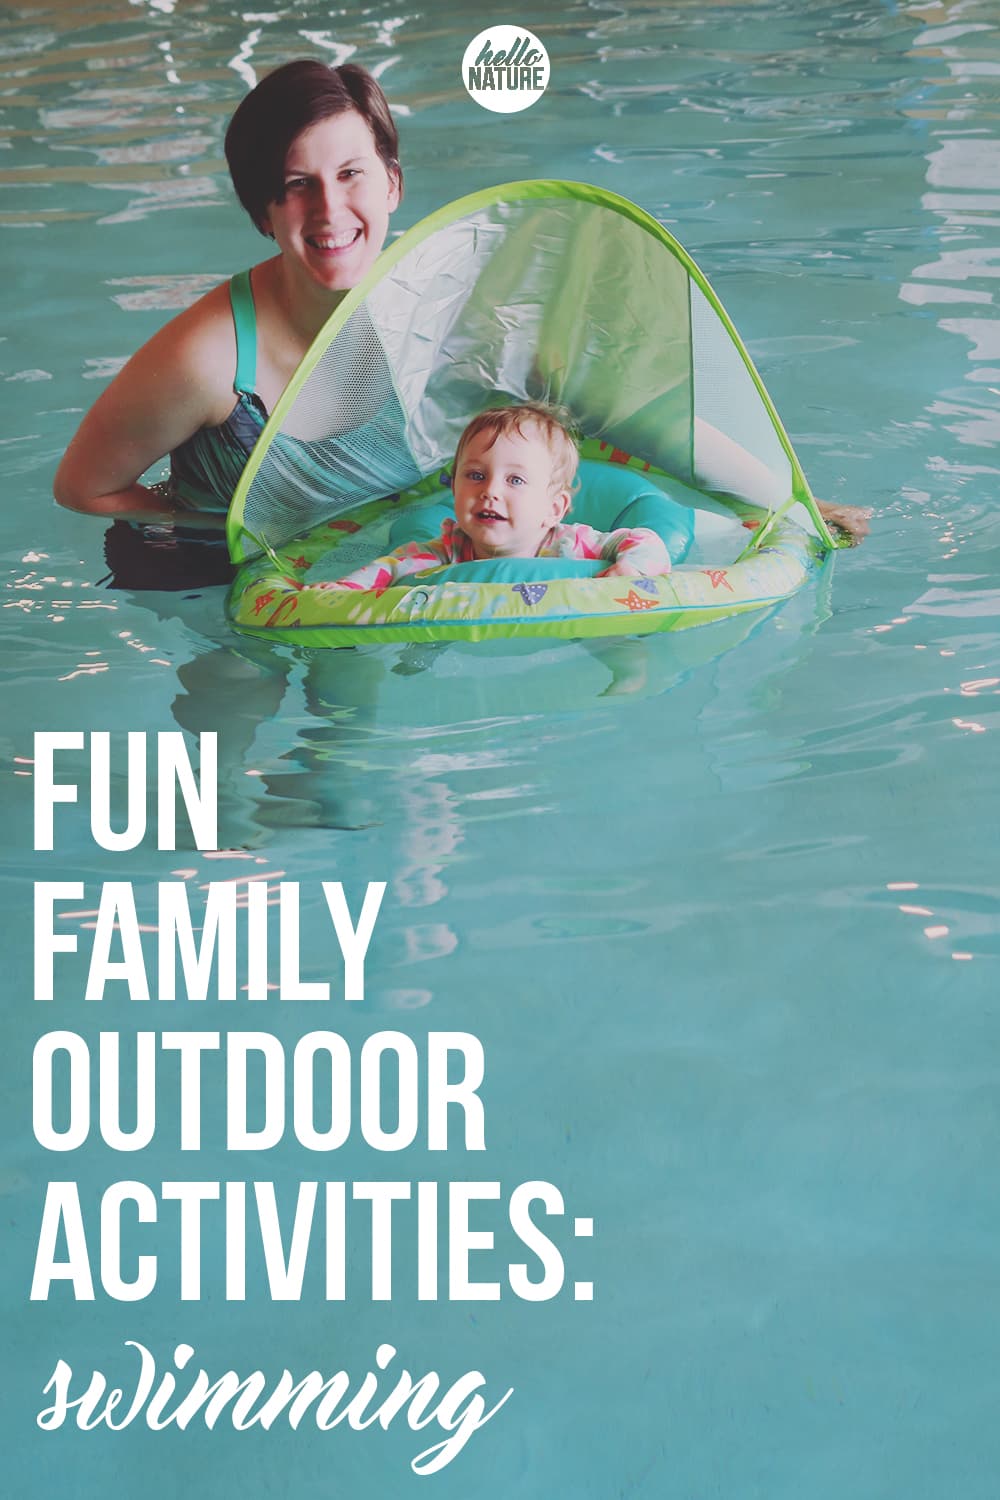 Looking for fun family outdoor activities? I've got you covered! Grab your swimsuit for this week's theme - it's all about swimming!